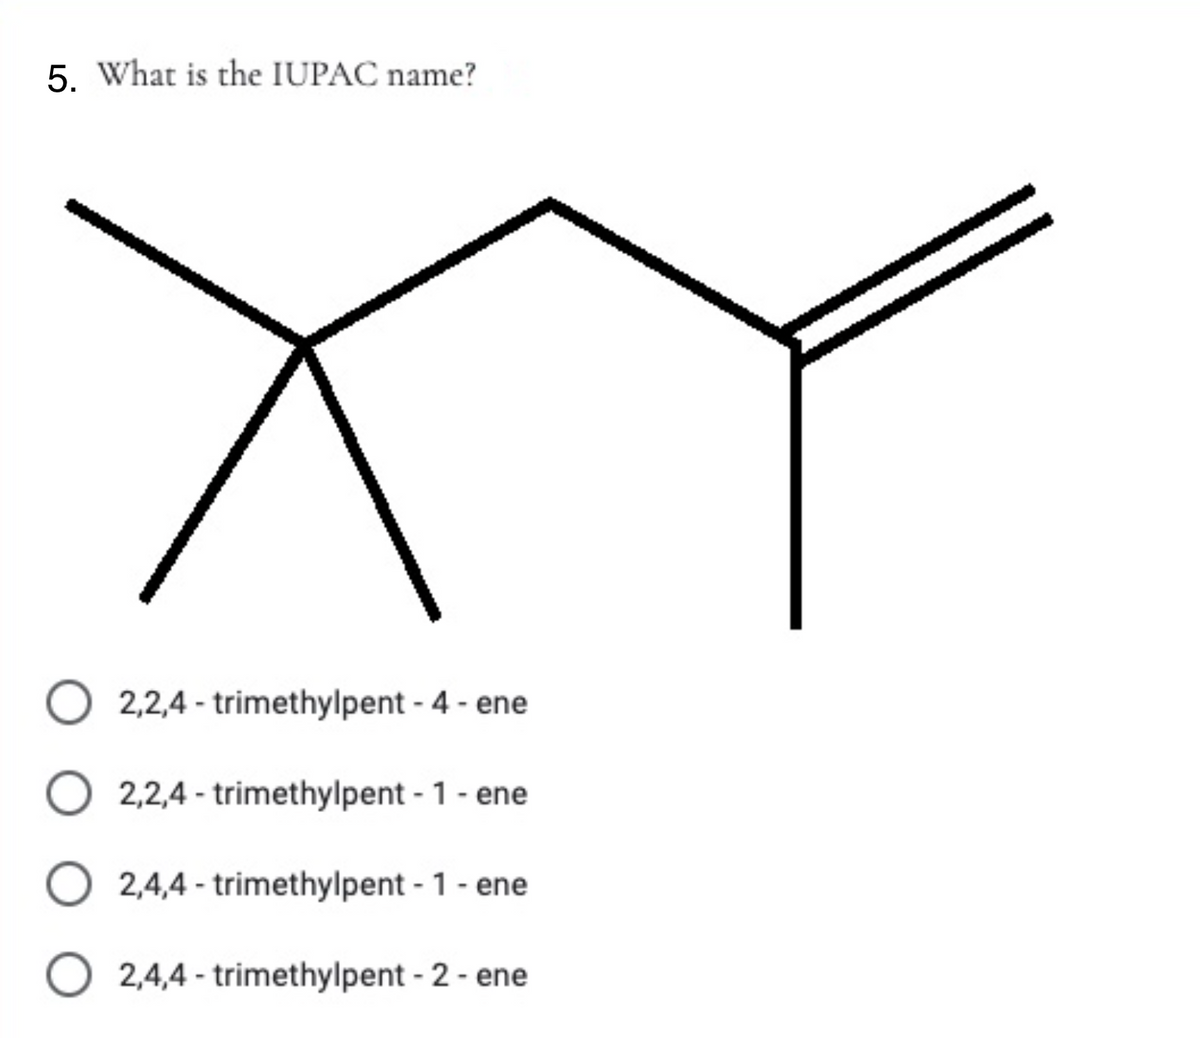 5. What is the IUPAC name?
2,2,4 - trimethylpent - 4 - ene
2,2,4 - trimethylpent - 1 - ene
O 2,4,4 - trimethylpent - 1 - ene
2,4,4 - trimethylpent - 2 - ene
